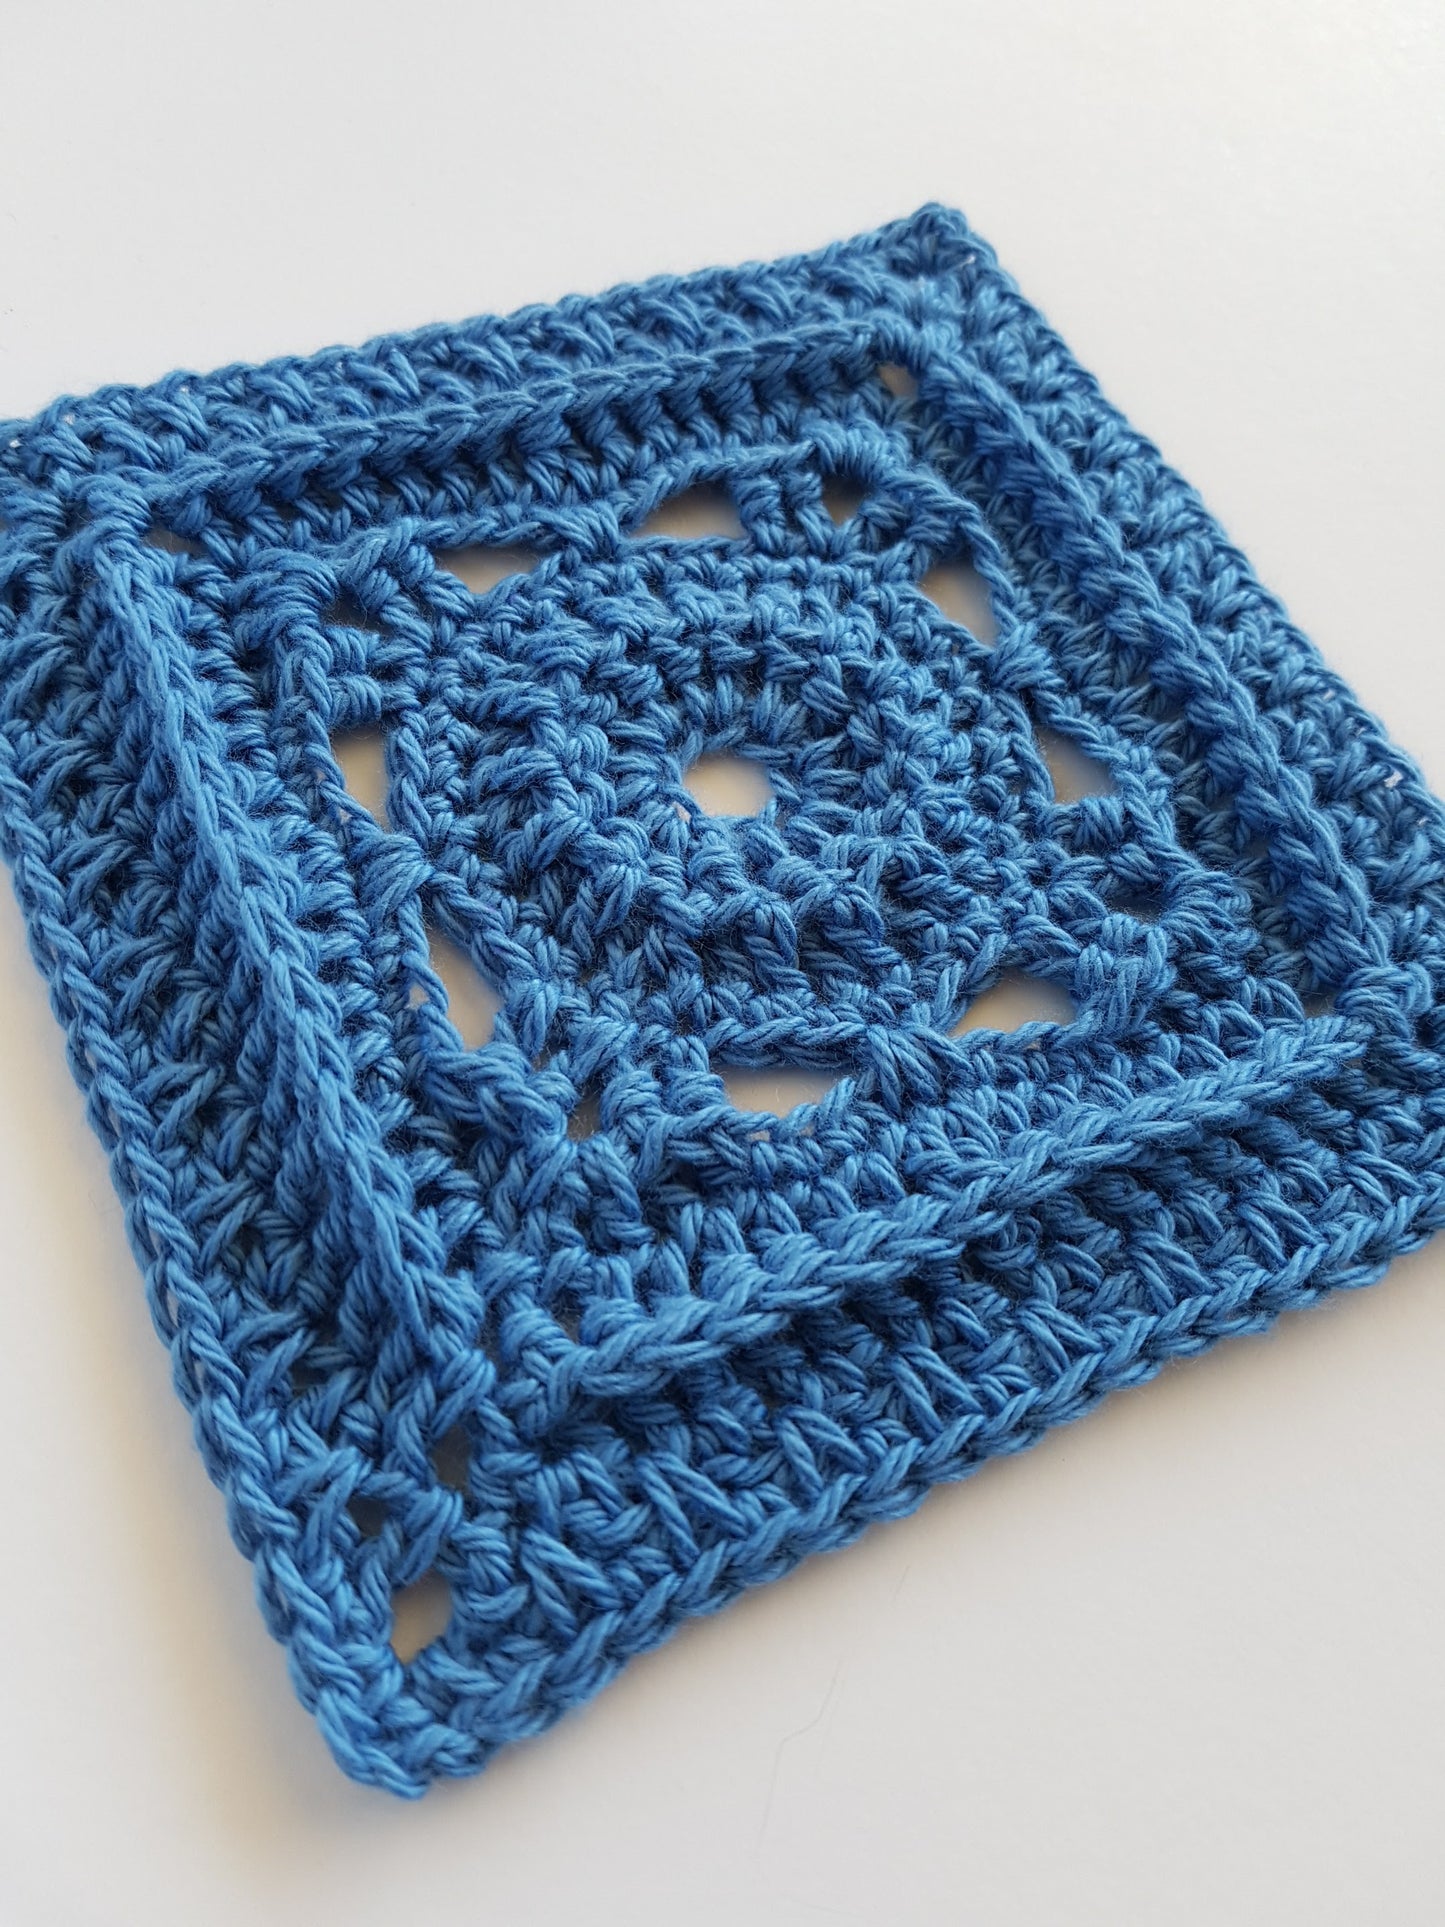 Baffin in single colour blue by Shelley Husband